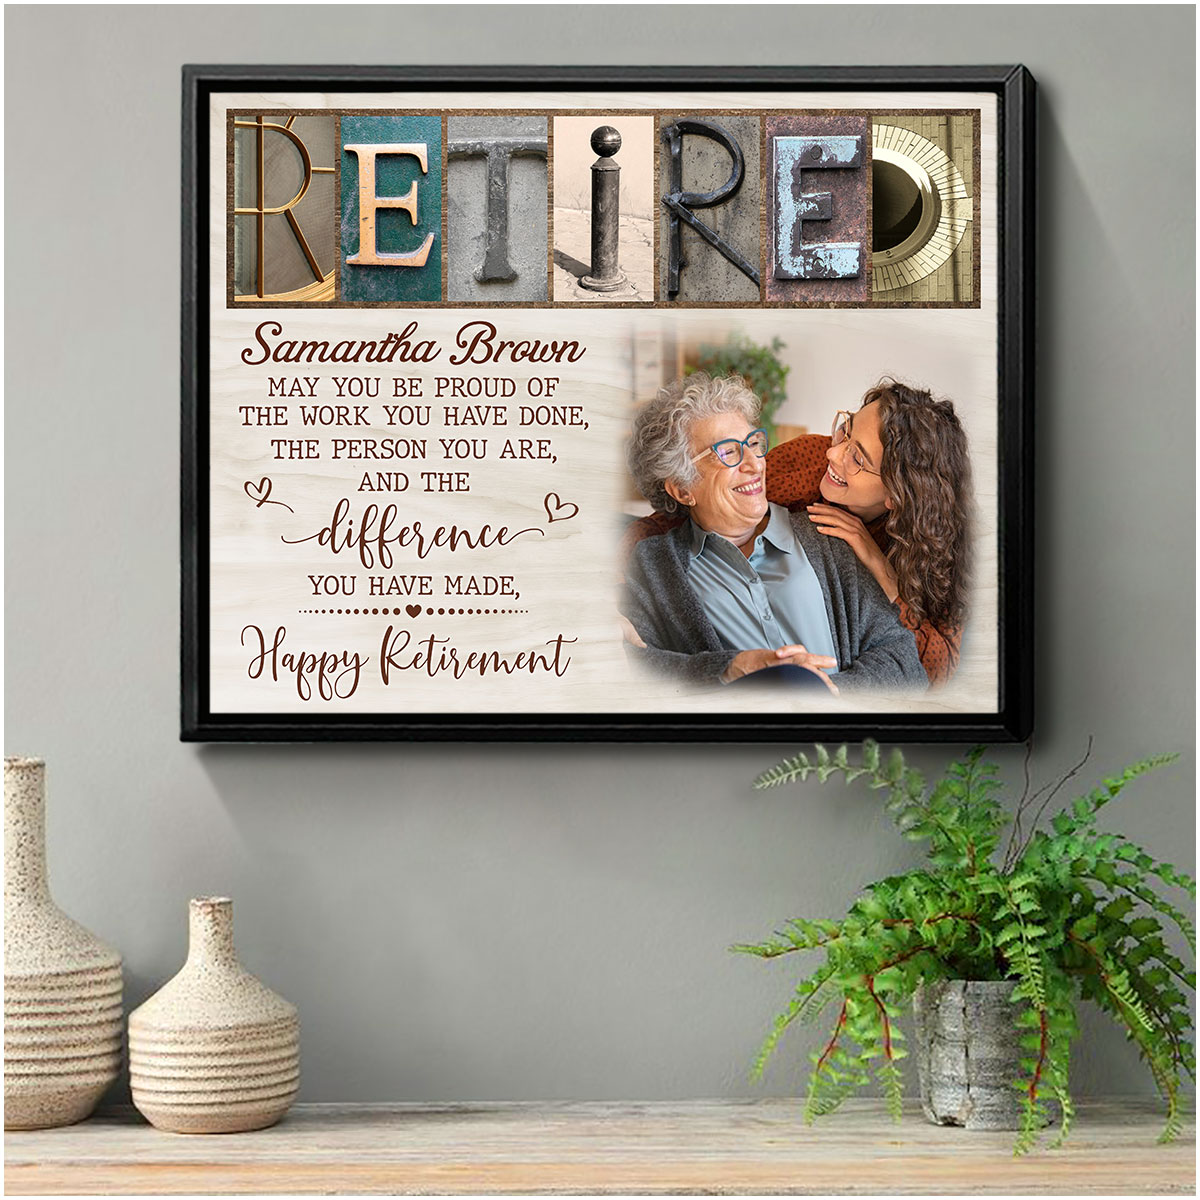 https://images.ohcanvas.com/ohcanvas_com/2022/06/01011015/womens-retirement-gift-idea-personalized-retirement-gift-for-her-1.jpg